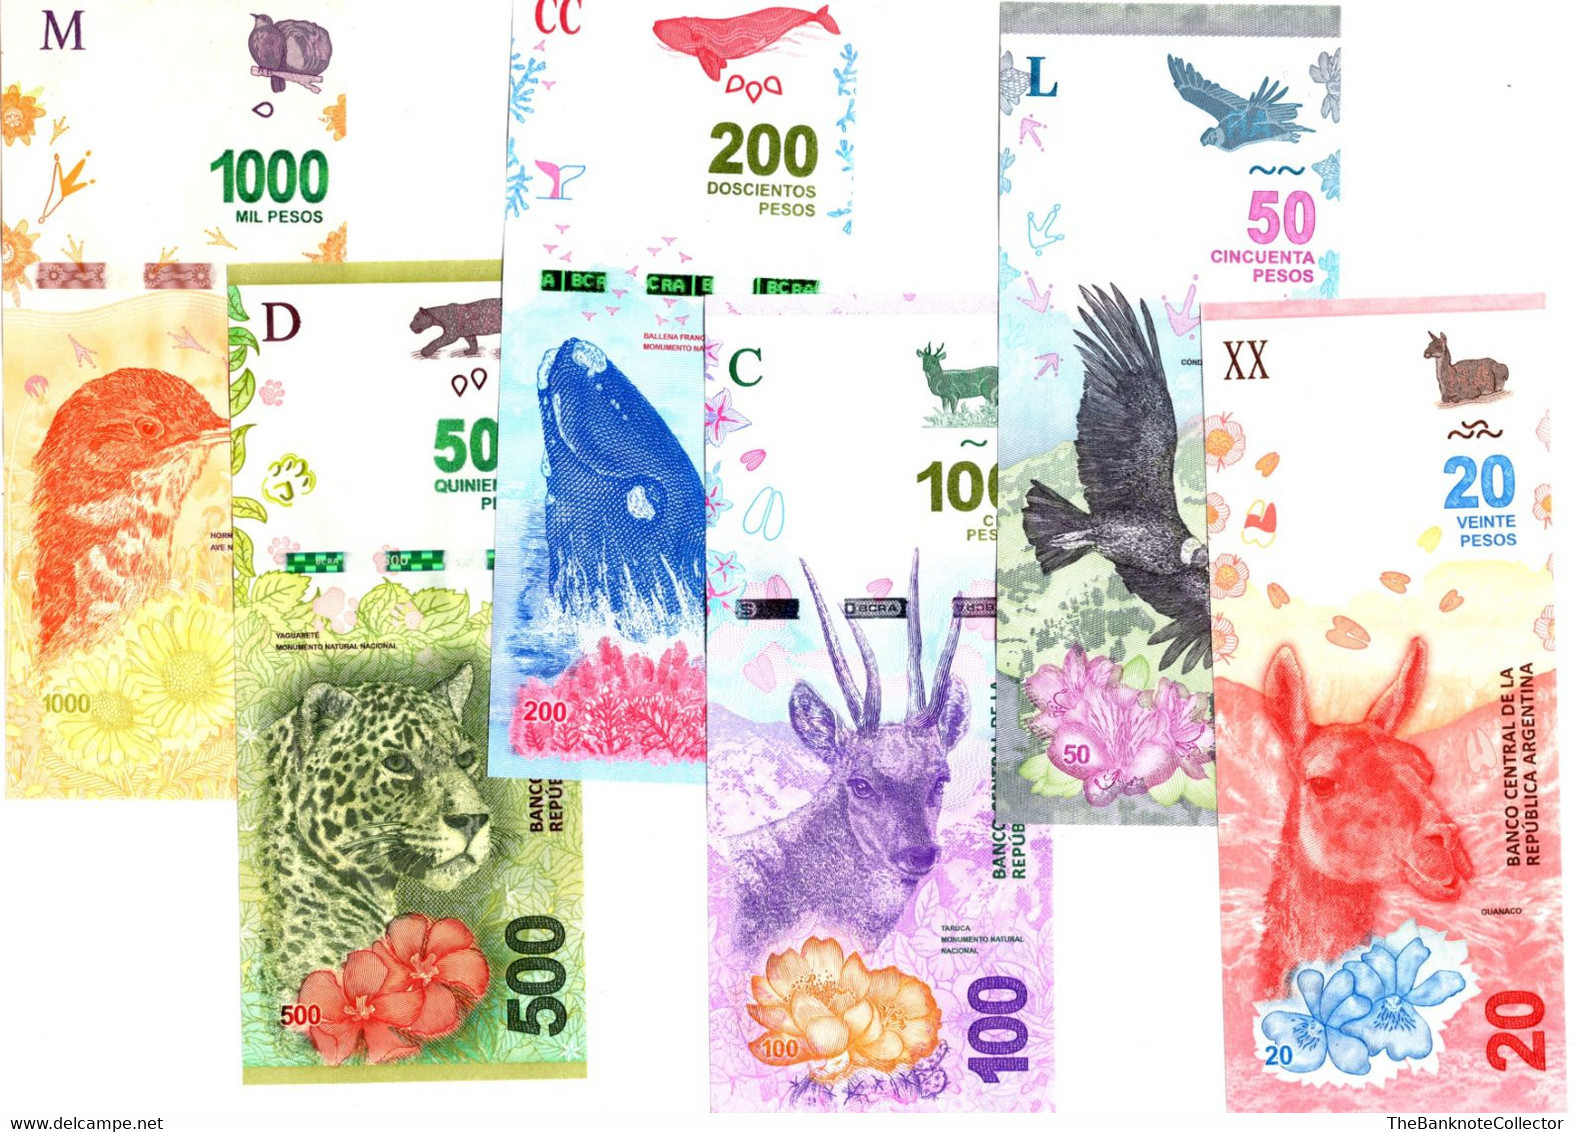 ARGENTINA 20 50 100 200 500 AND 1000 PESOS NATIVE ANIMAL SERIES 7 PIECES BANKNOTES SET UNCIRCULATED - Argentinië